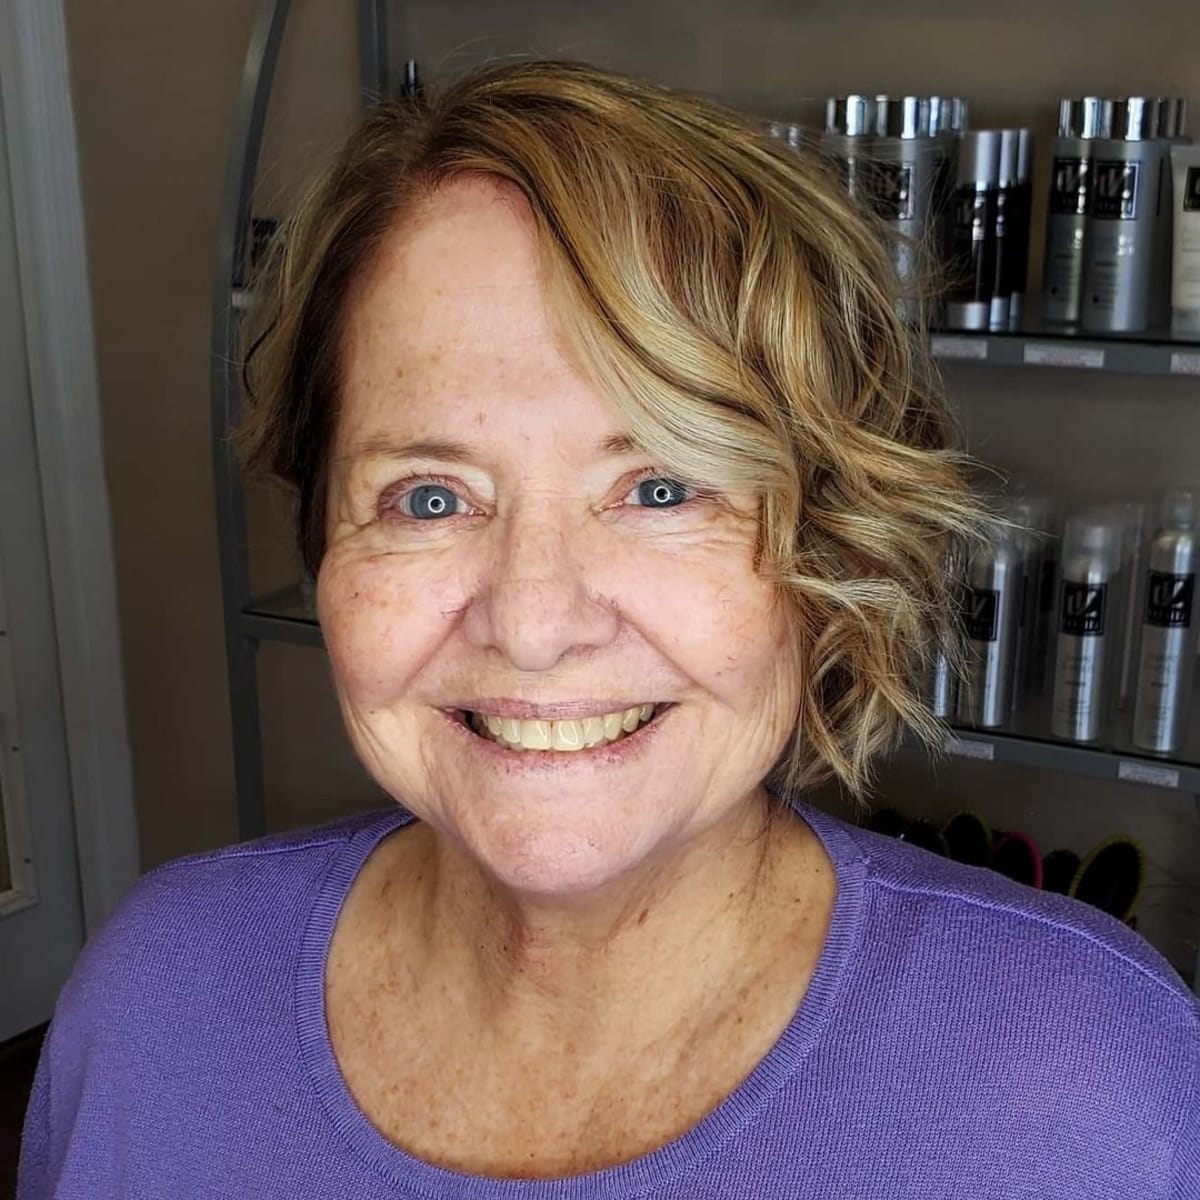 Chin-length Bob with Beach Waves for women past their 60s